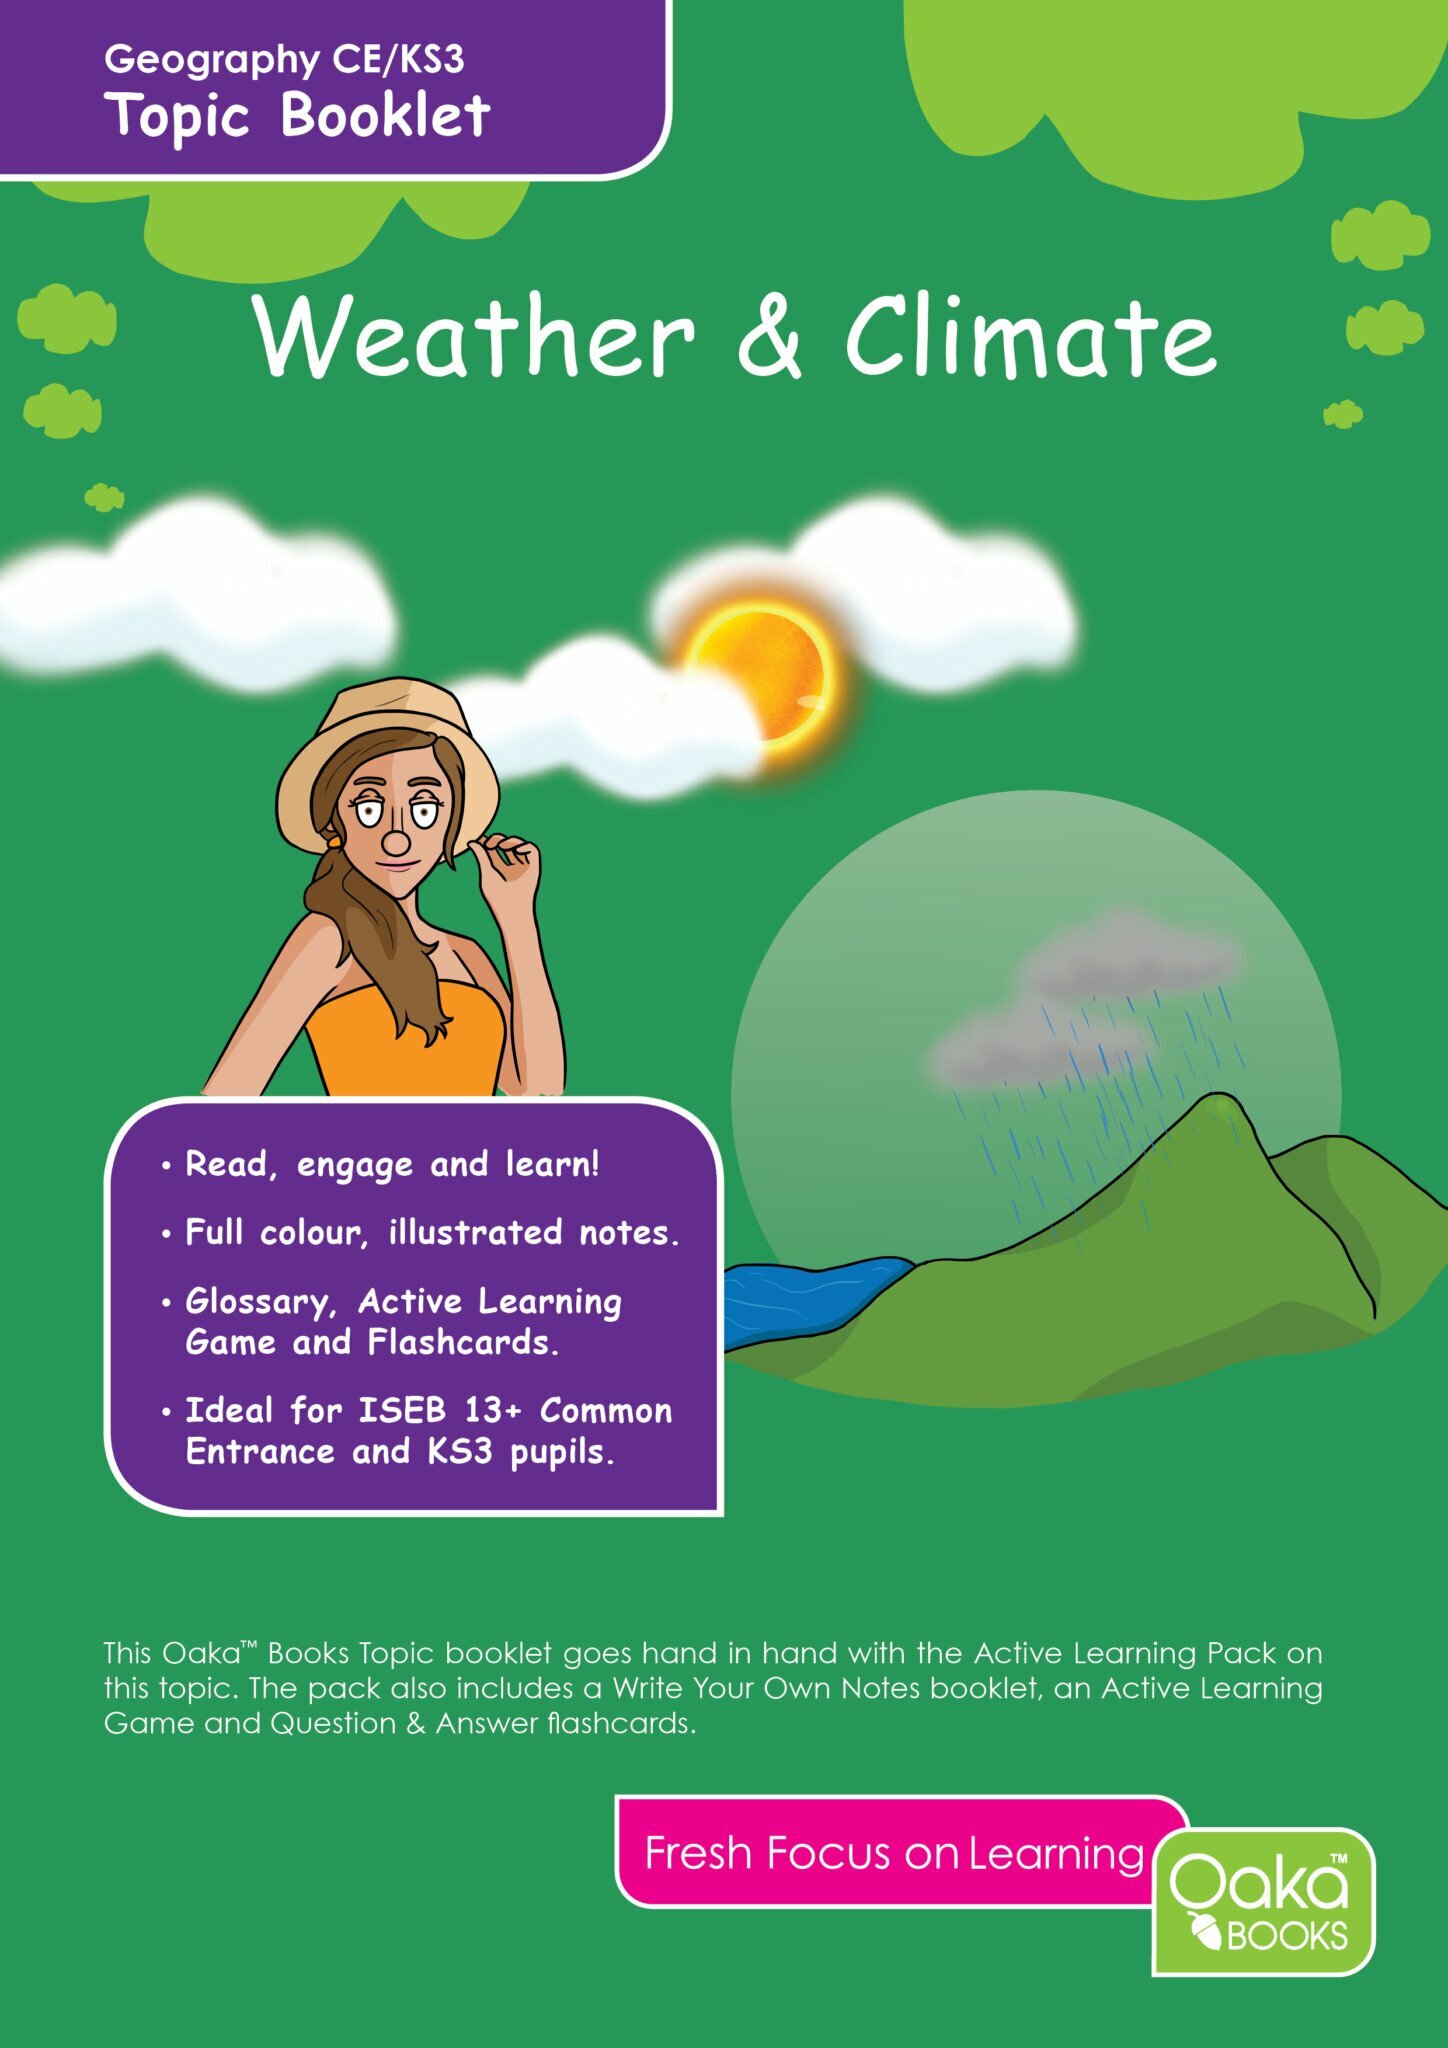 CE/KS3 Geography: Weather & Climate